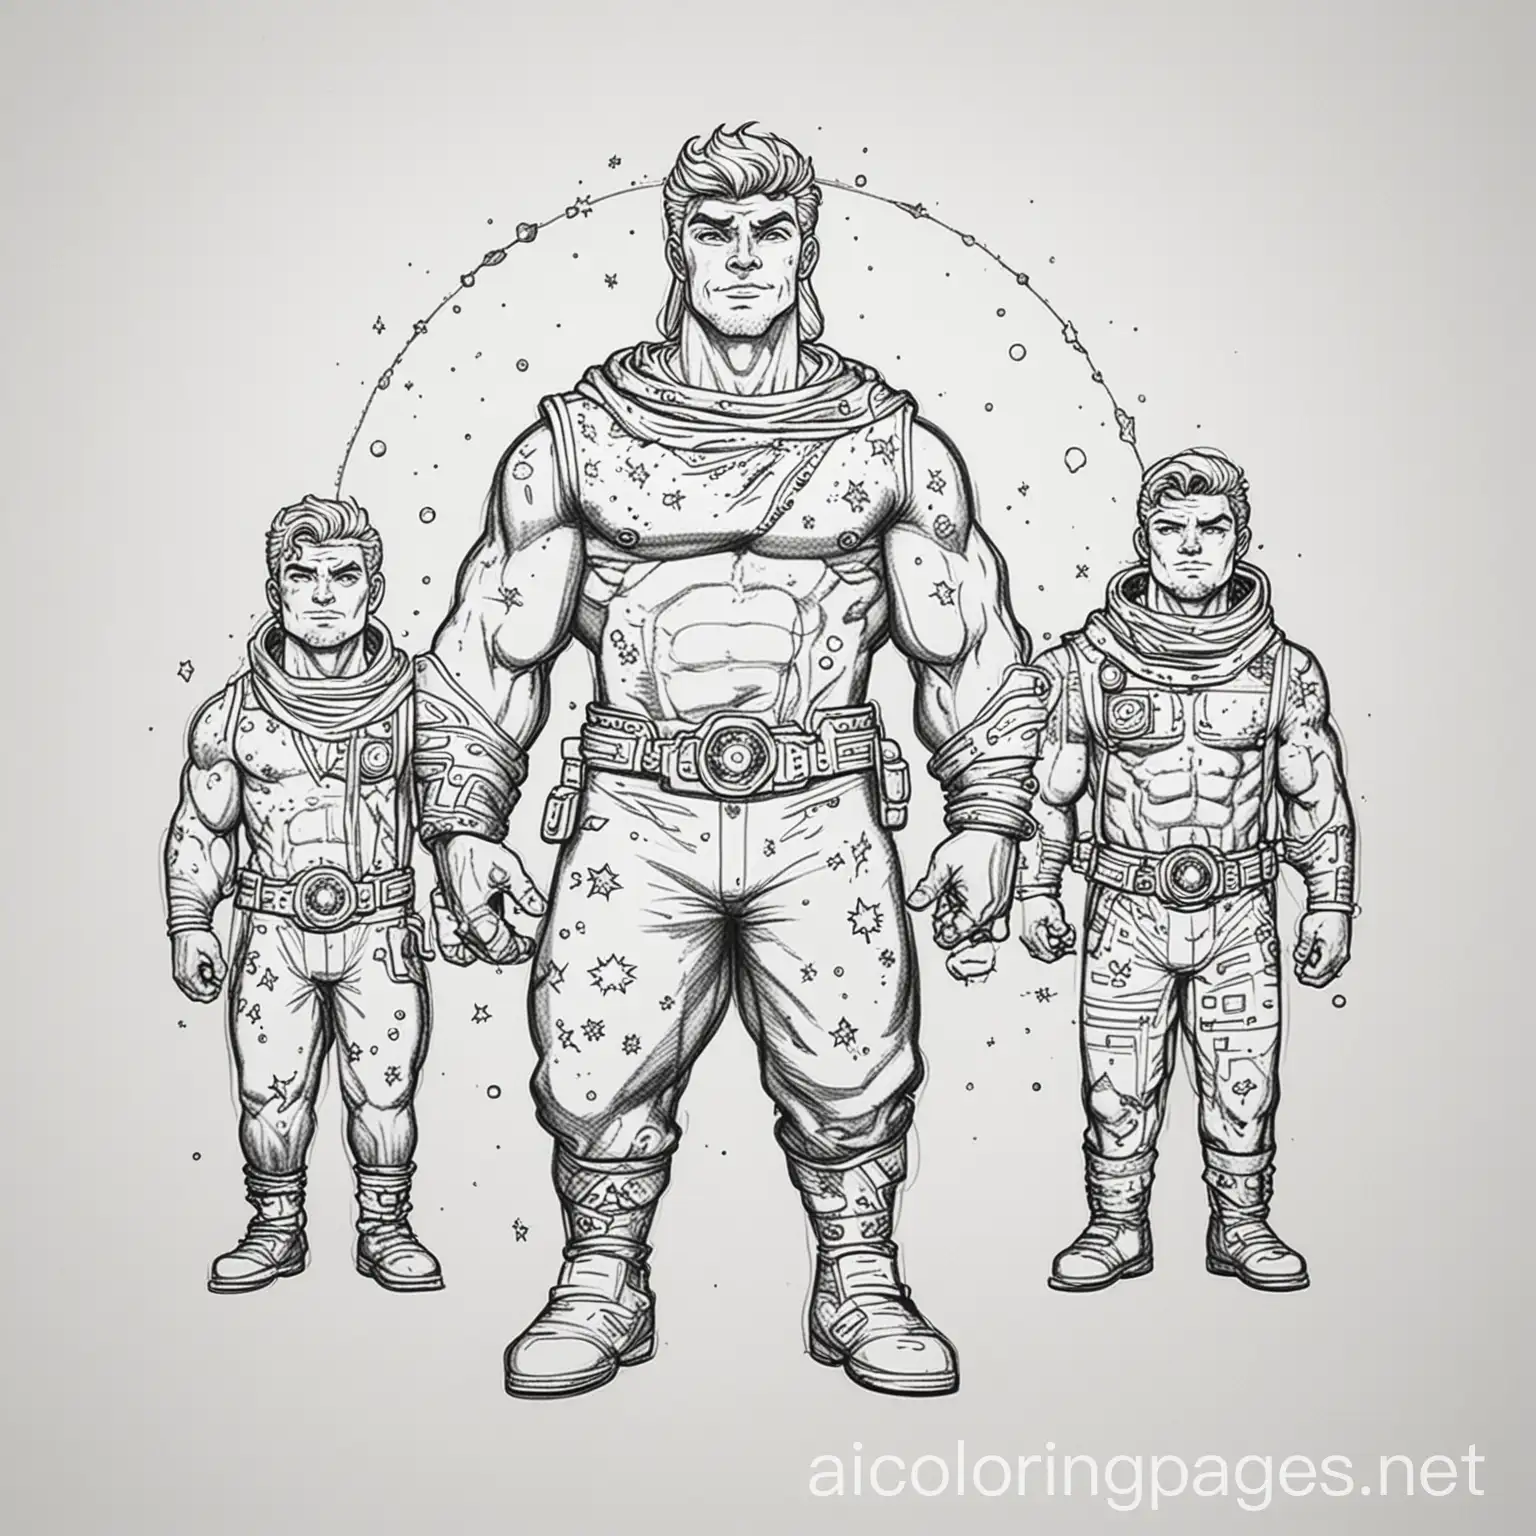 cosmic dude with two bigger dudes on the side, Coloring Page, black and white, line art, white background, Simplicity, Ample White Space. The background of the coloring page is plain white to make it easy for young children to color within the lines. The outlines of all the subjects are easy to distinguish, making it simple for kids to color without too much difficulty